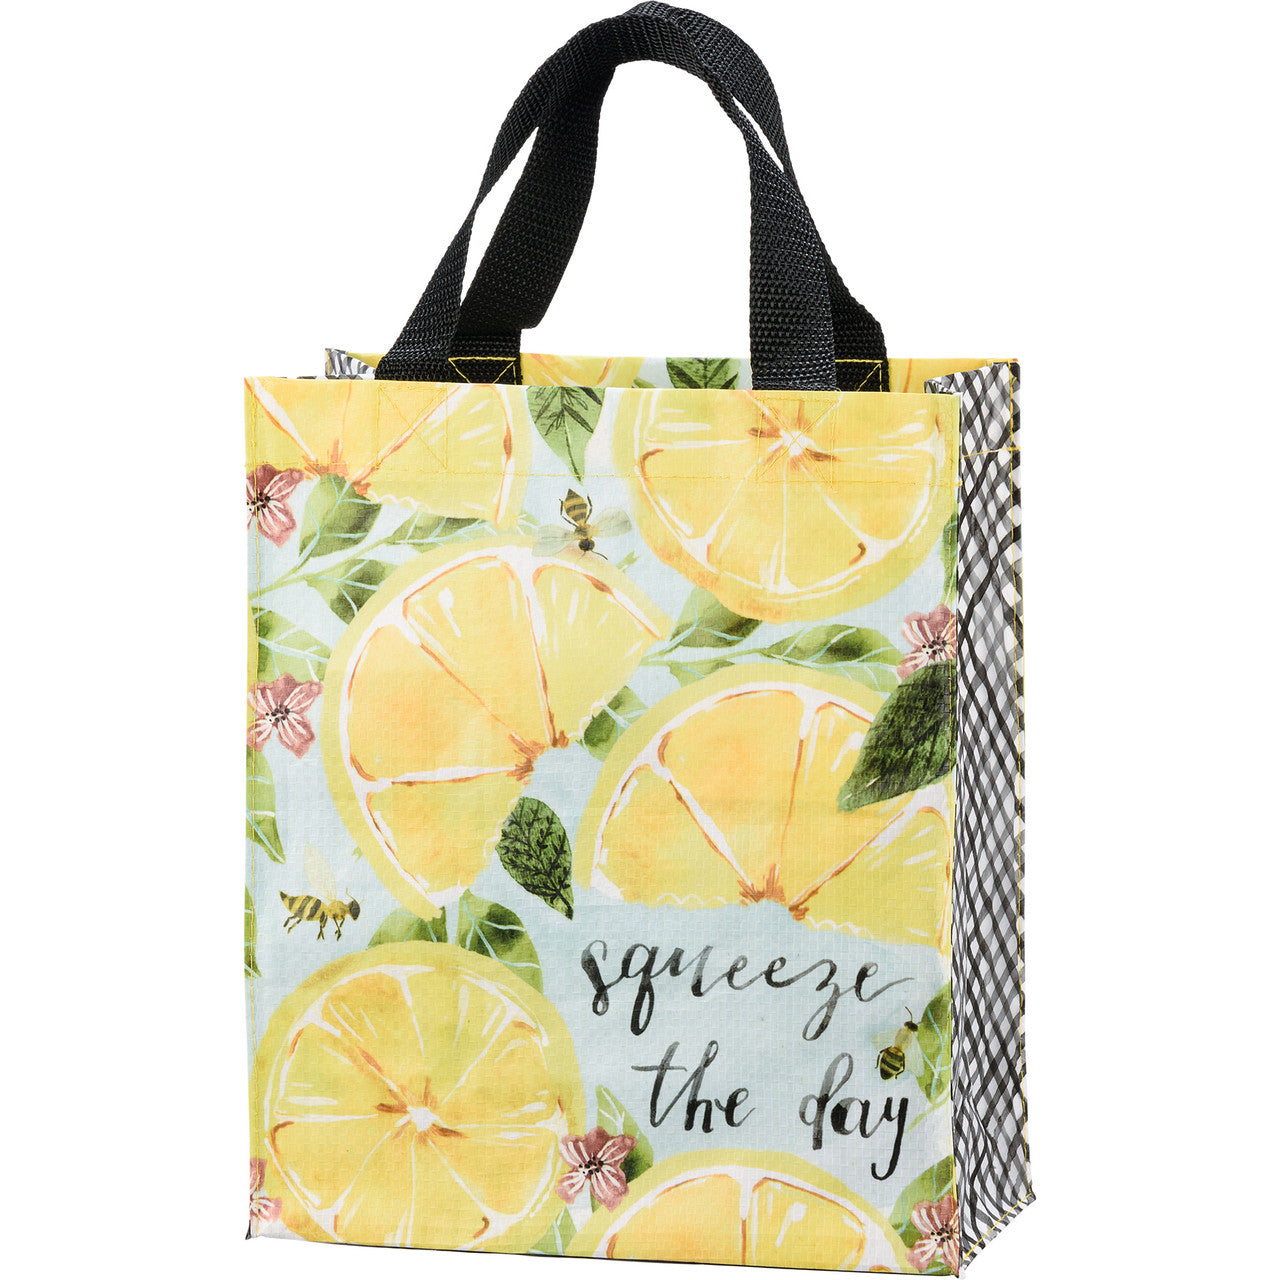 'Squeeze The Day' Tote Bag